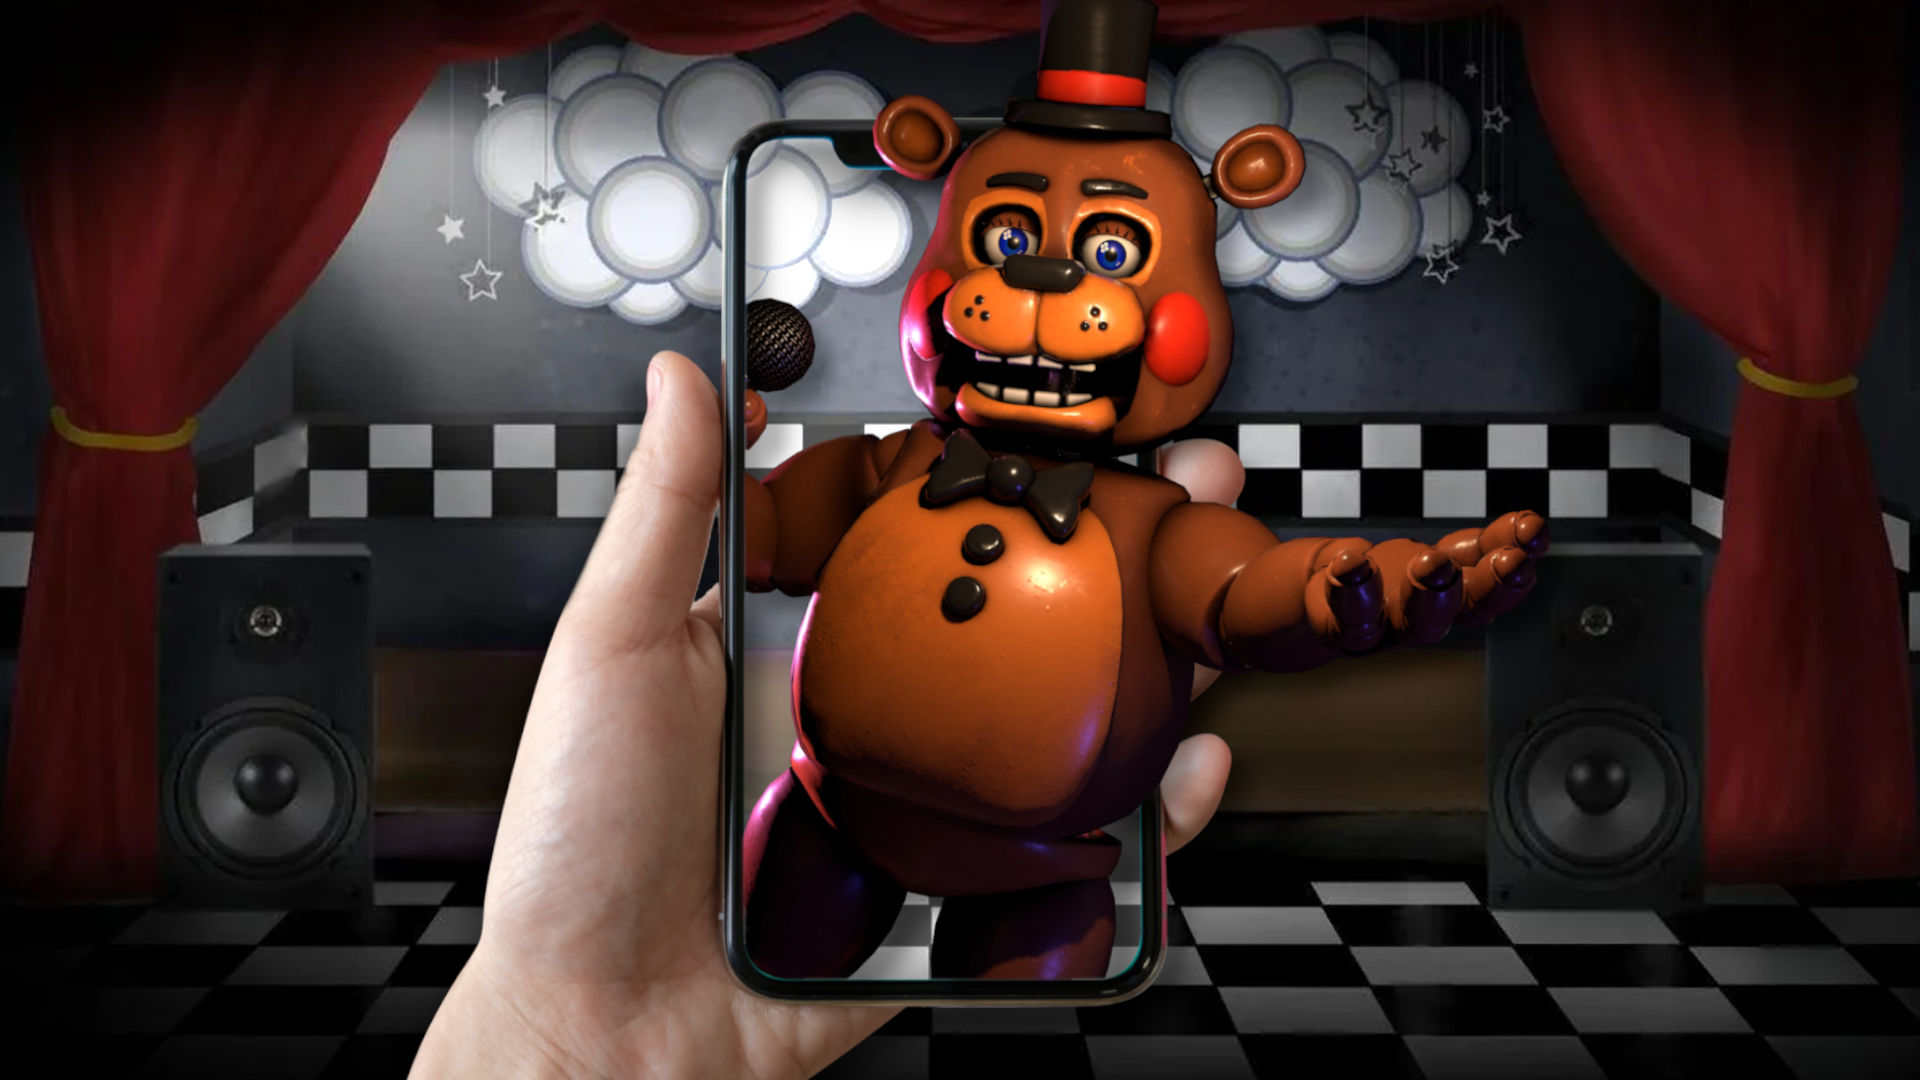 Free: Five Nights at Freddy's 4 FNaF World Five Nights at Freddy's 2  Halloween - Circus characters 